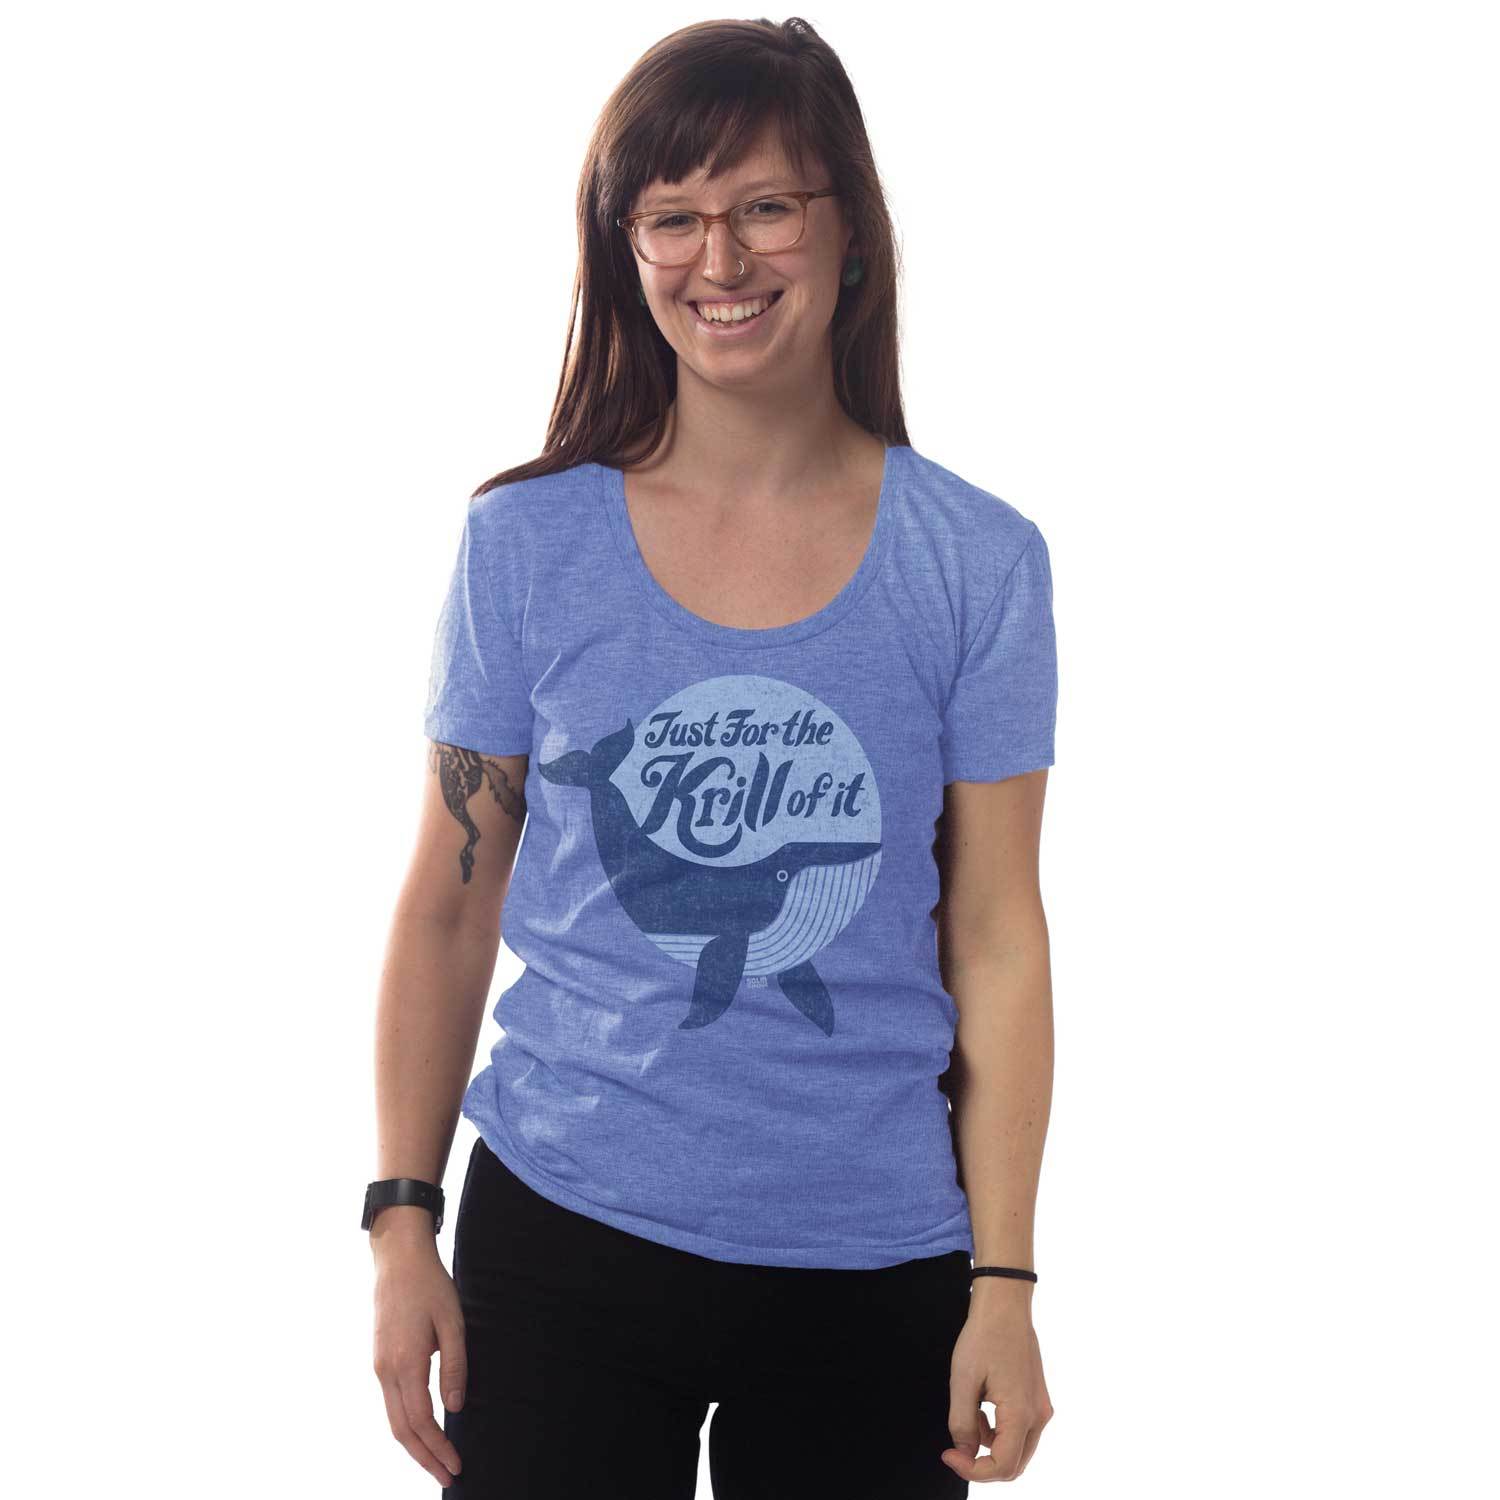 Women's Just For the Krill of It Vintage Graphic Tee | Funny Whale T-shirt on Model | Solid Threads